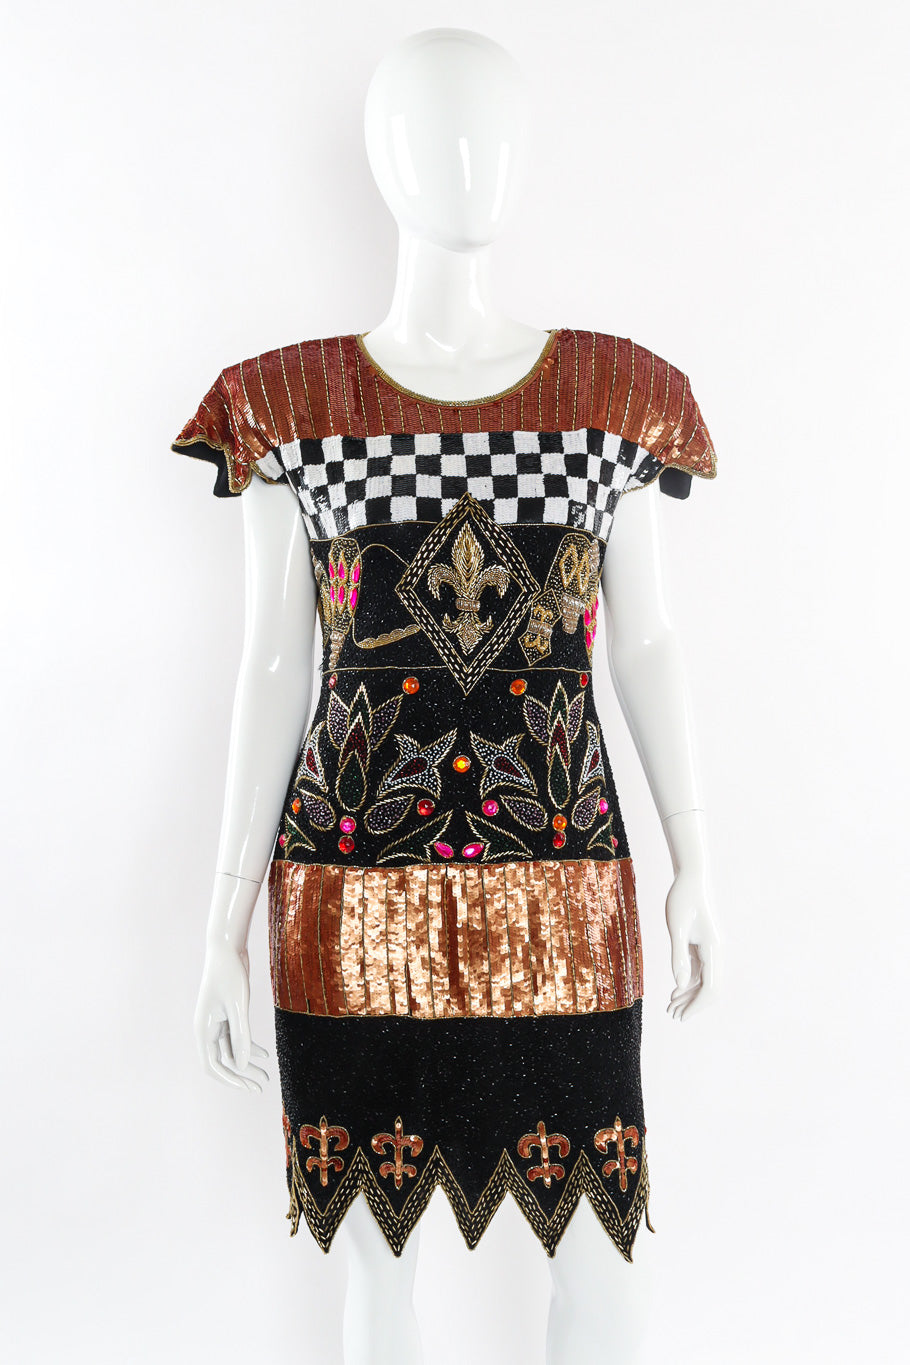 Multi Embellished Cocktail Dress by Fashion Creation Front View @recessla